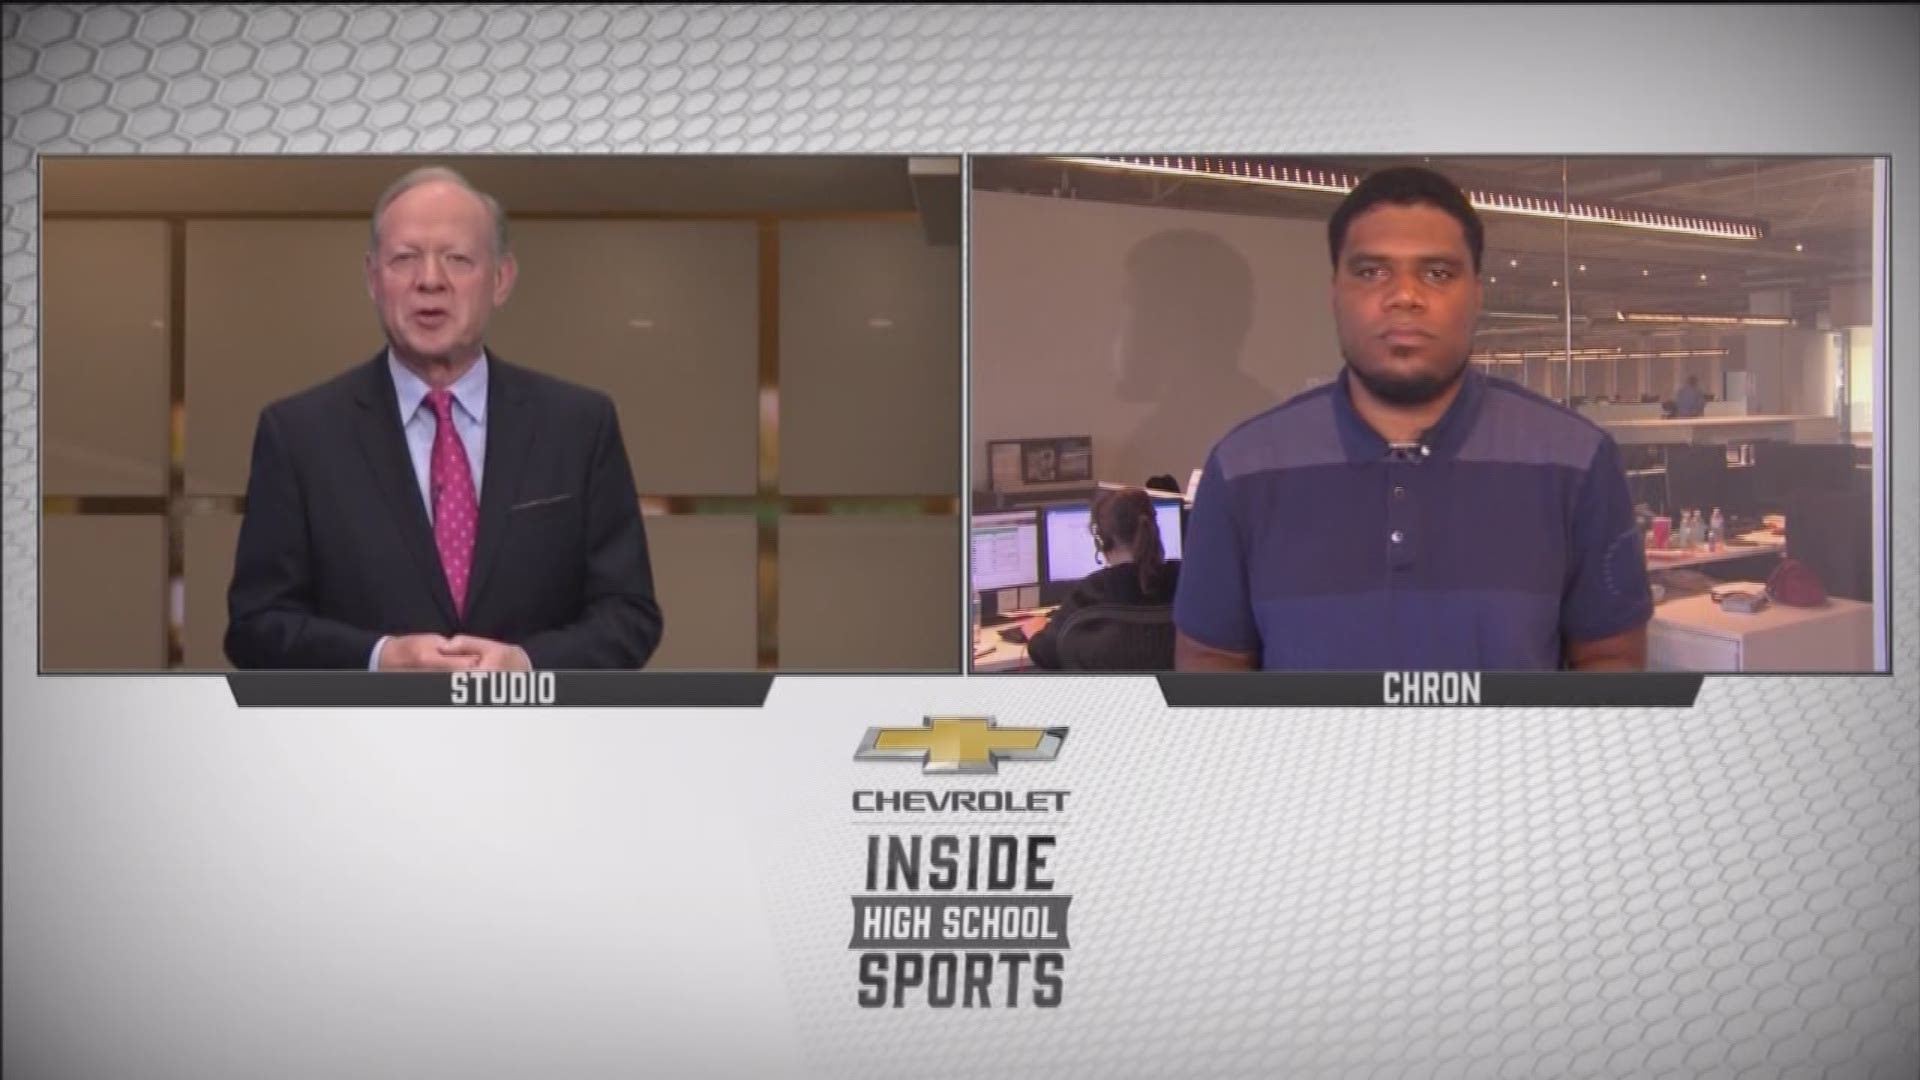 The Chevrolet Inside High School Sports program featured analysis from the Houston Chronicle's Adam Coleman.